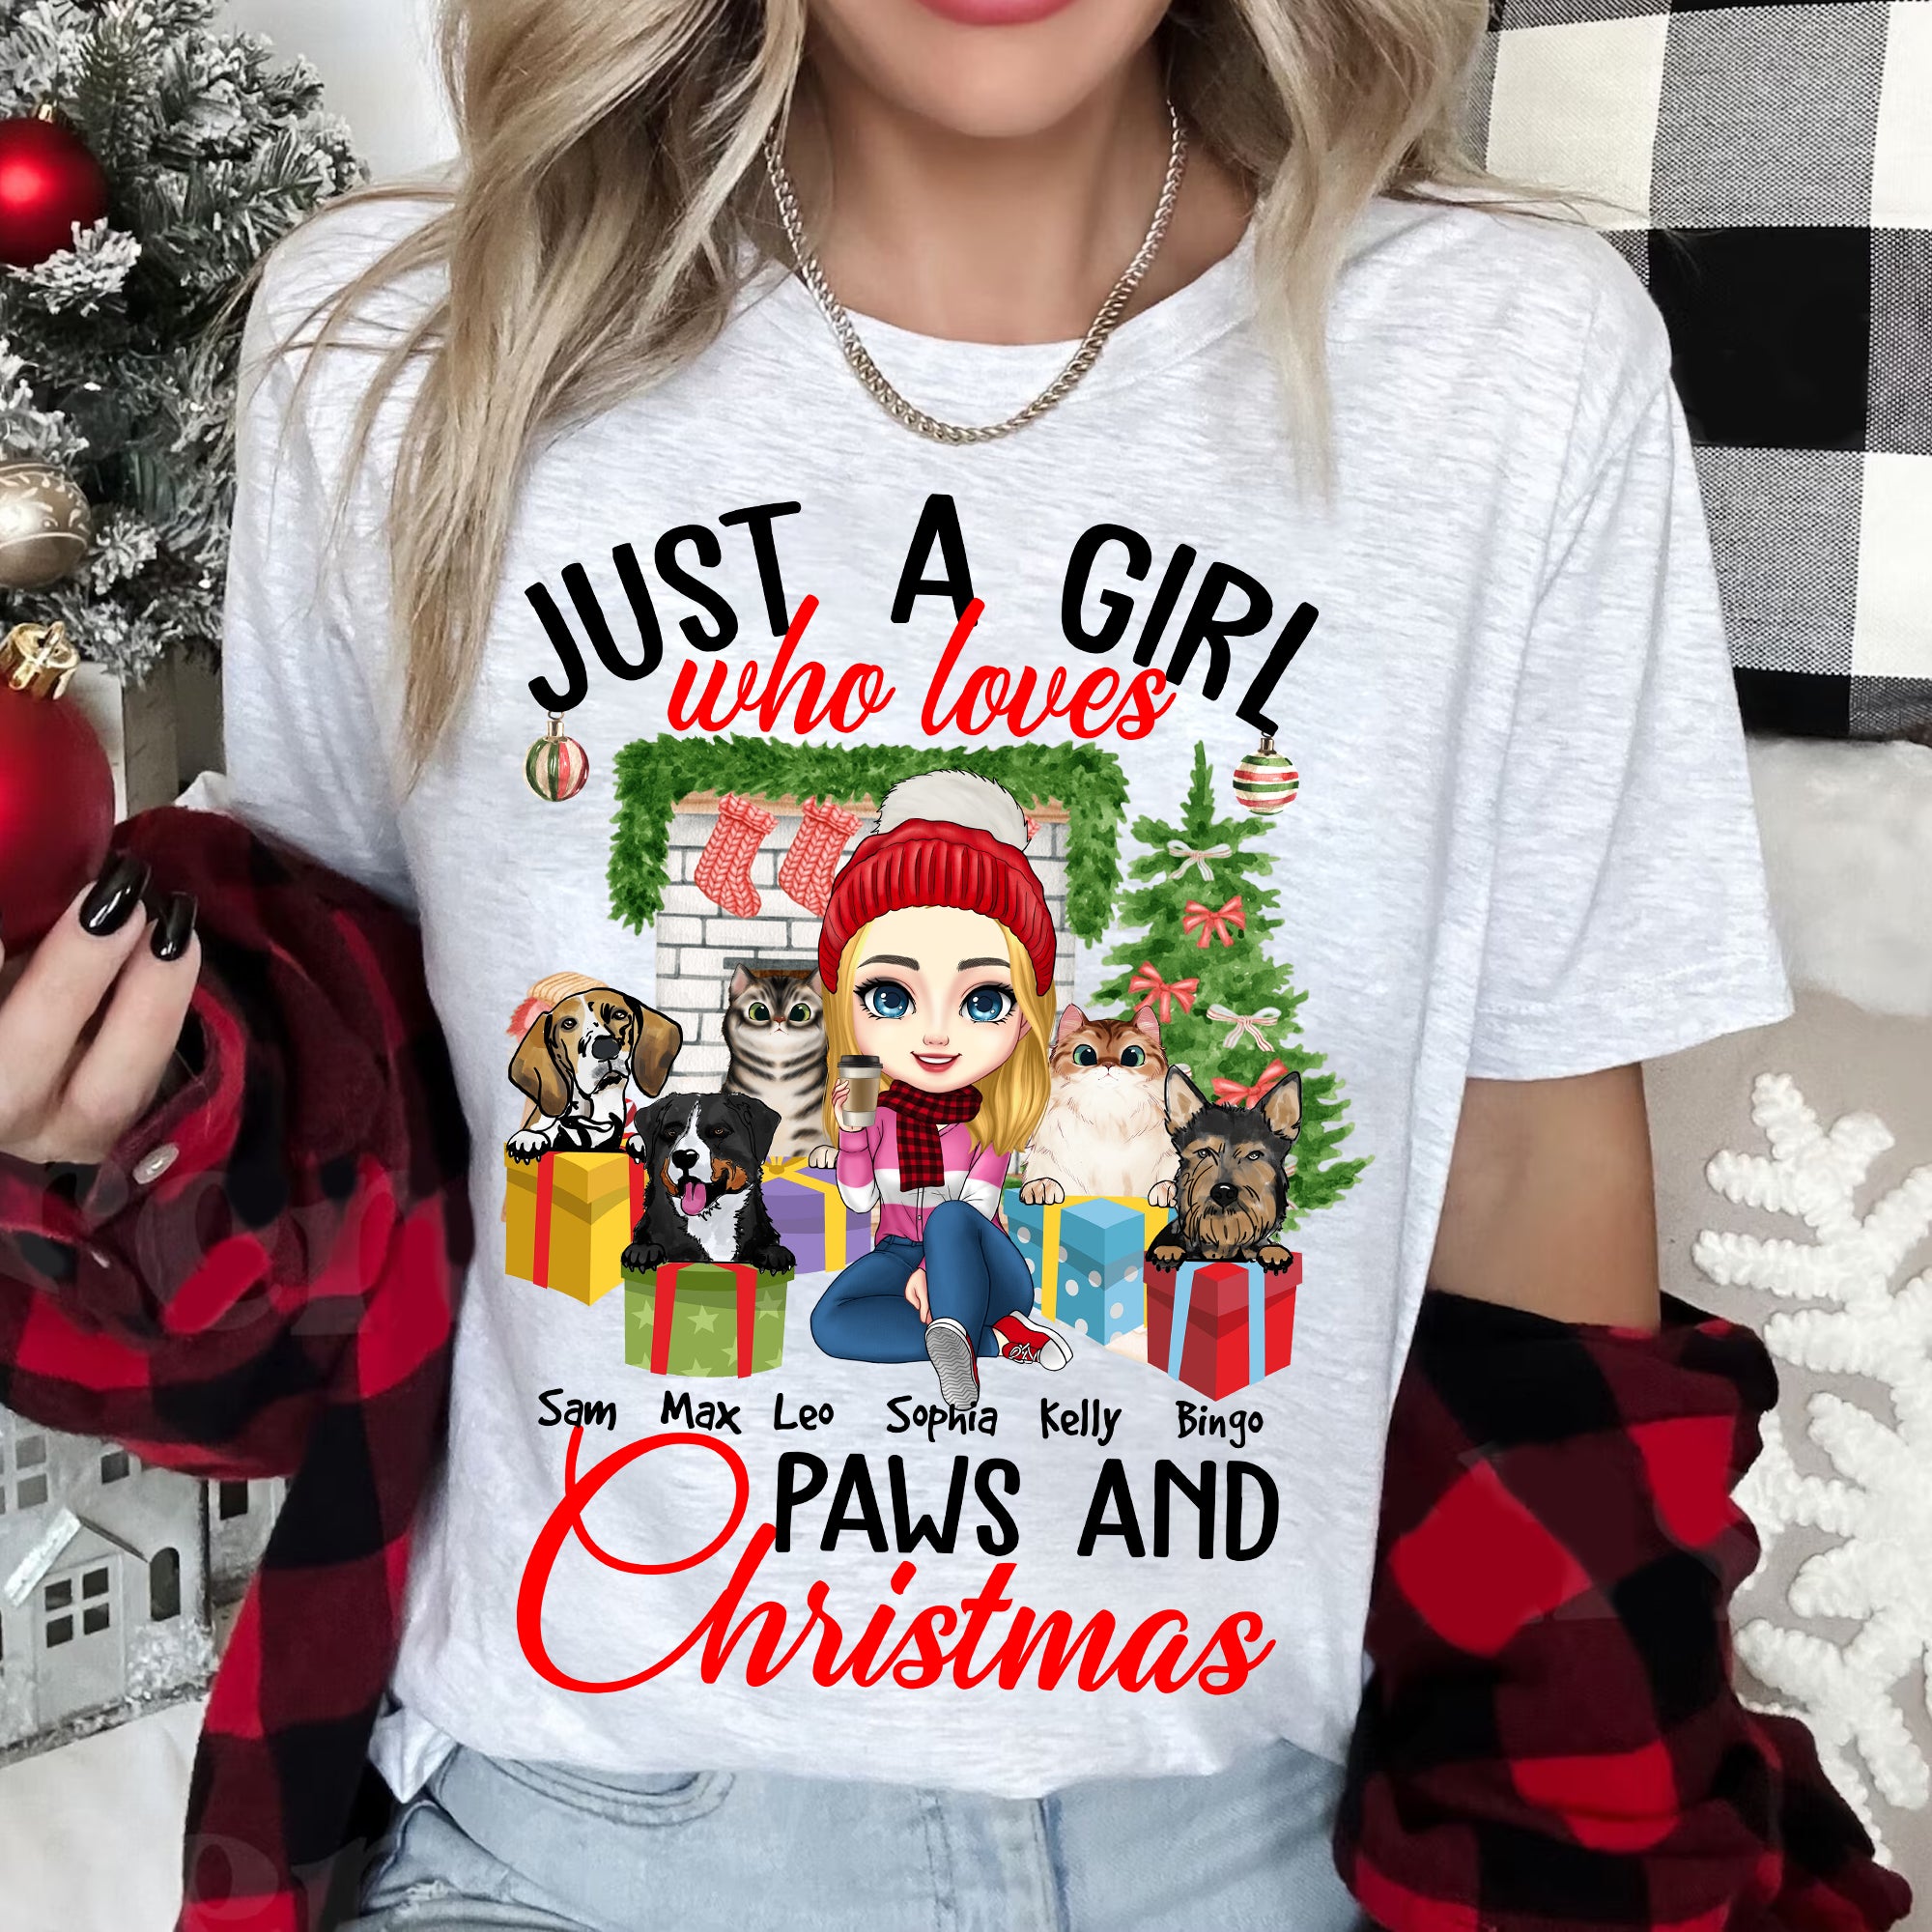 Just A Girl Who Loves Paws And Christmas - Custom Appearance, Pets And Names - Personalized T-Shirt - Gift For Pet Lovers